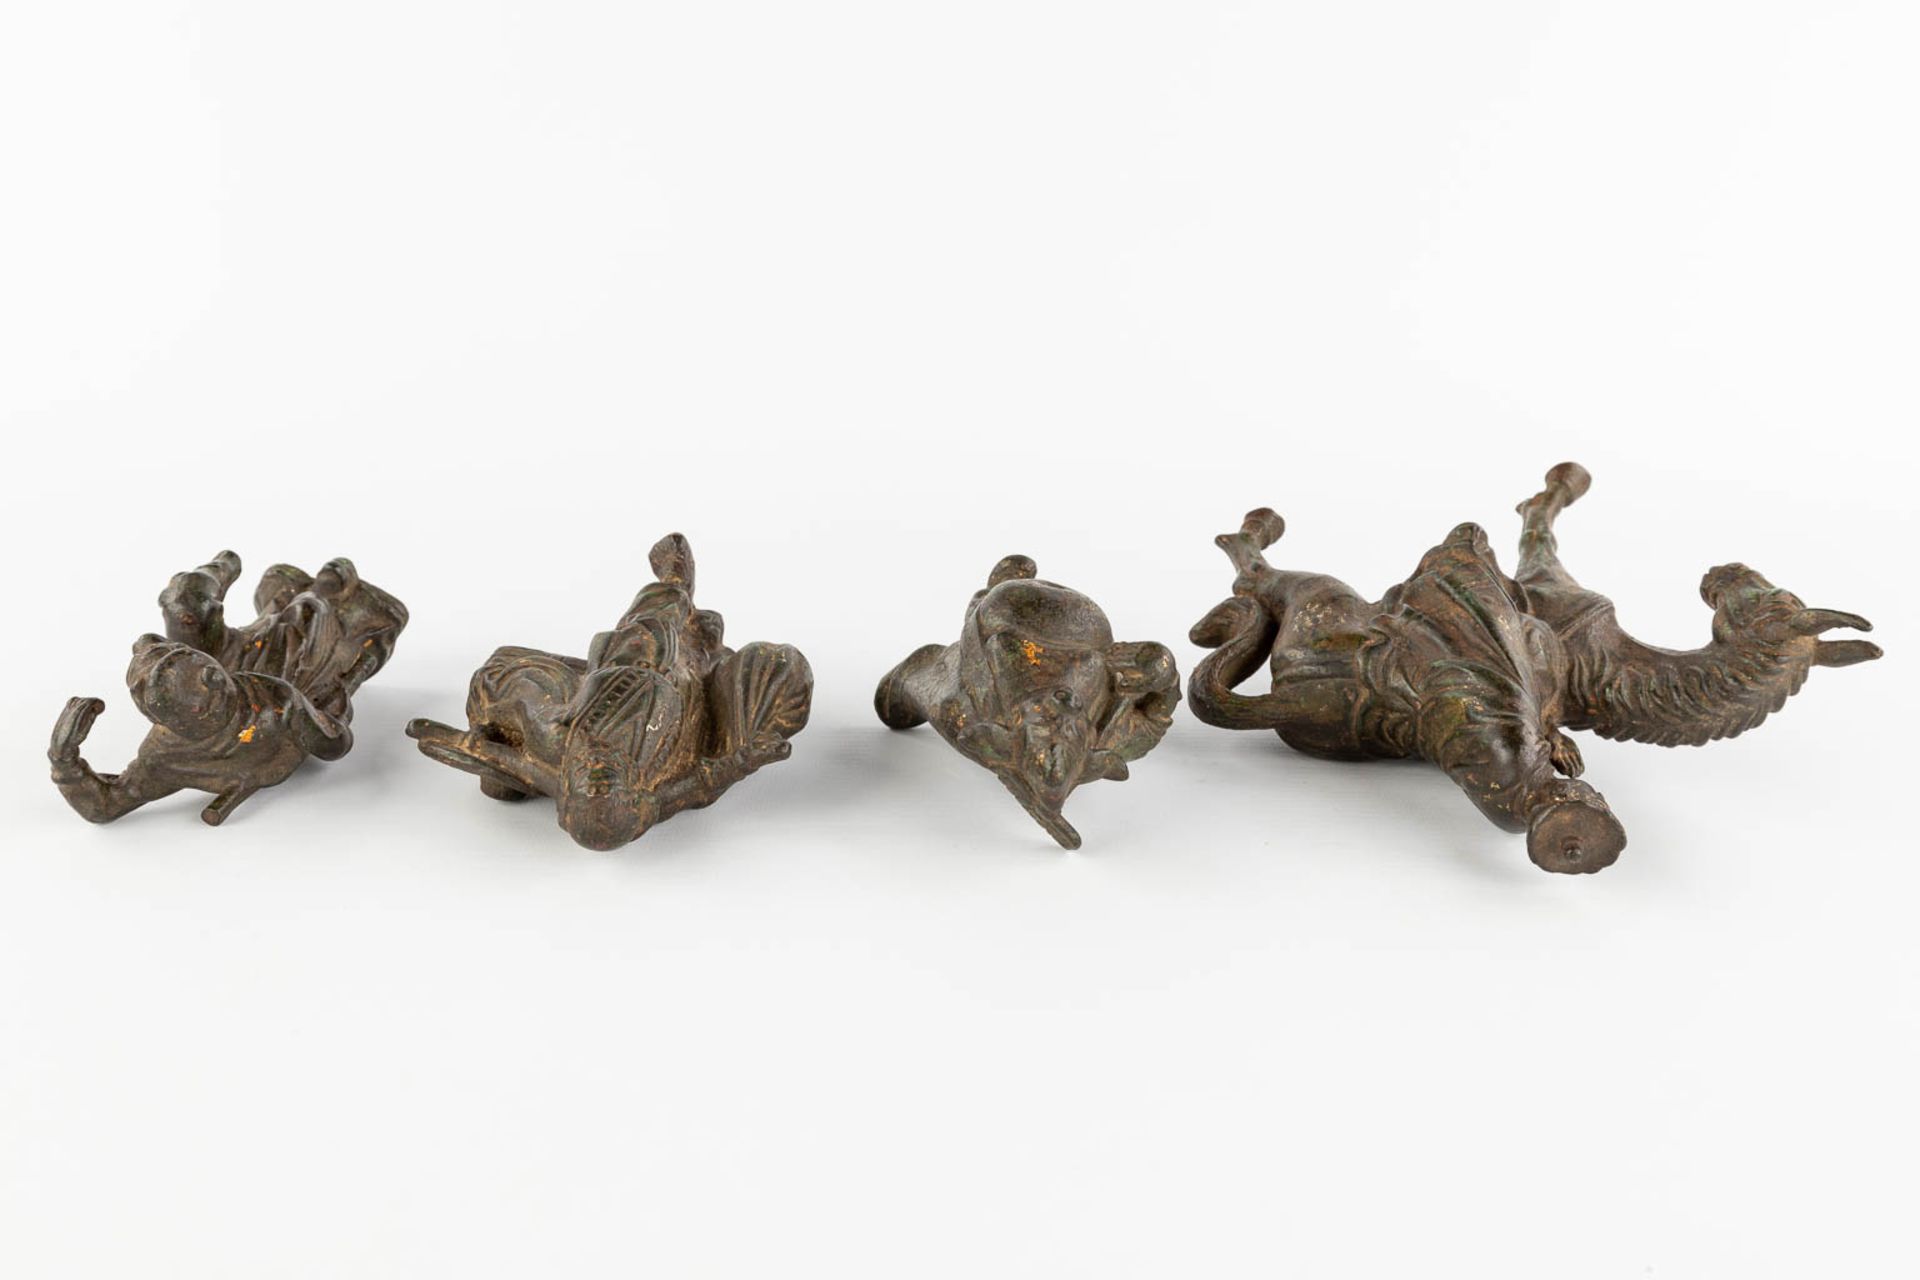 4 Chinese figurines, made of bronze. (L:7 x W:18 x H:18 cm) - Image 8 of 12